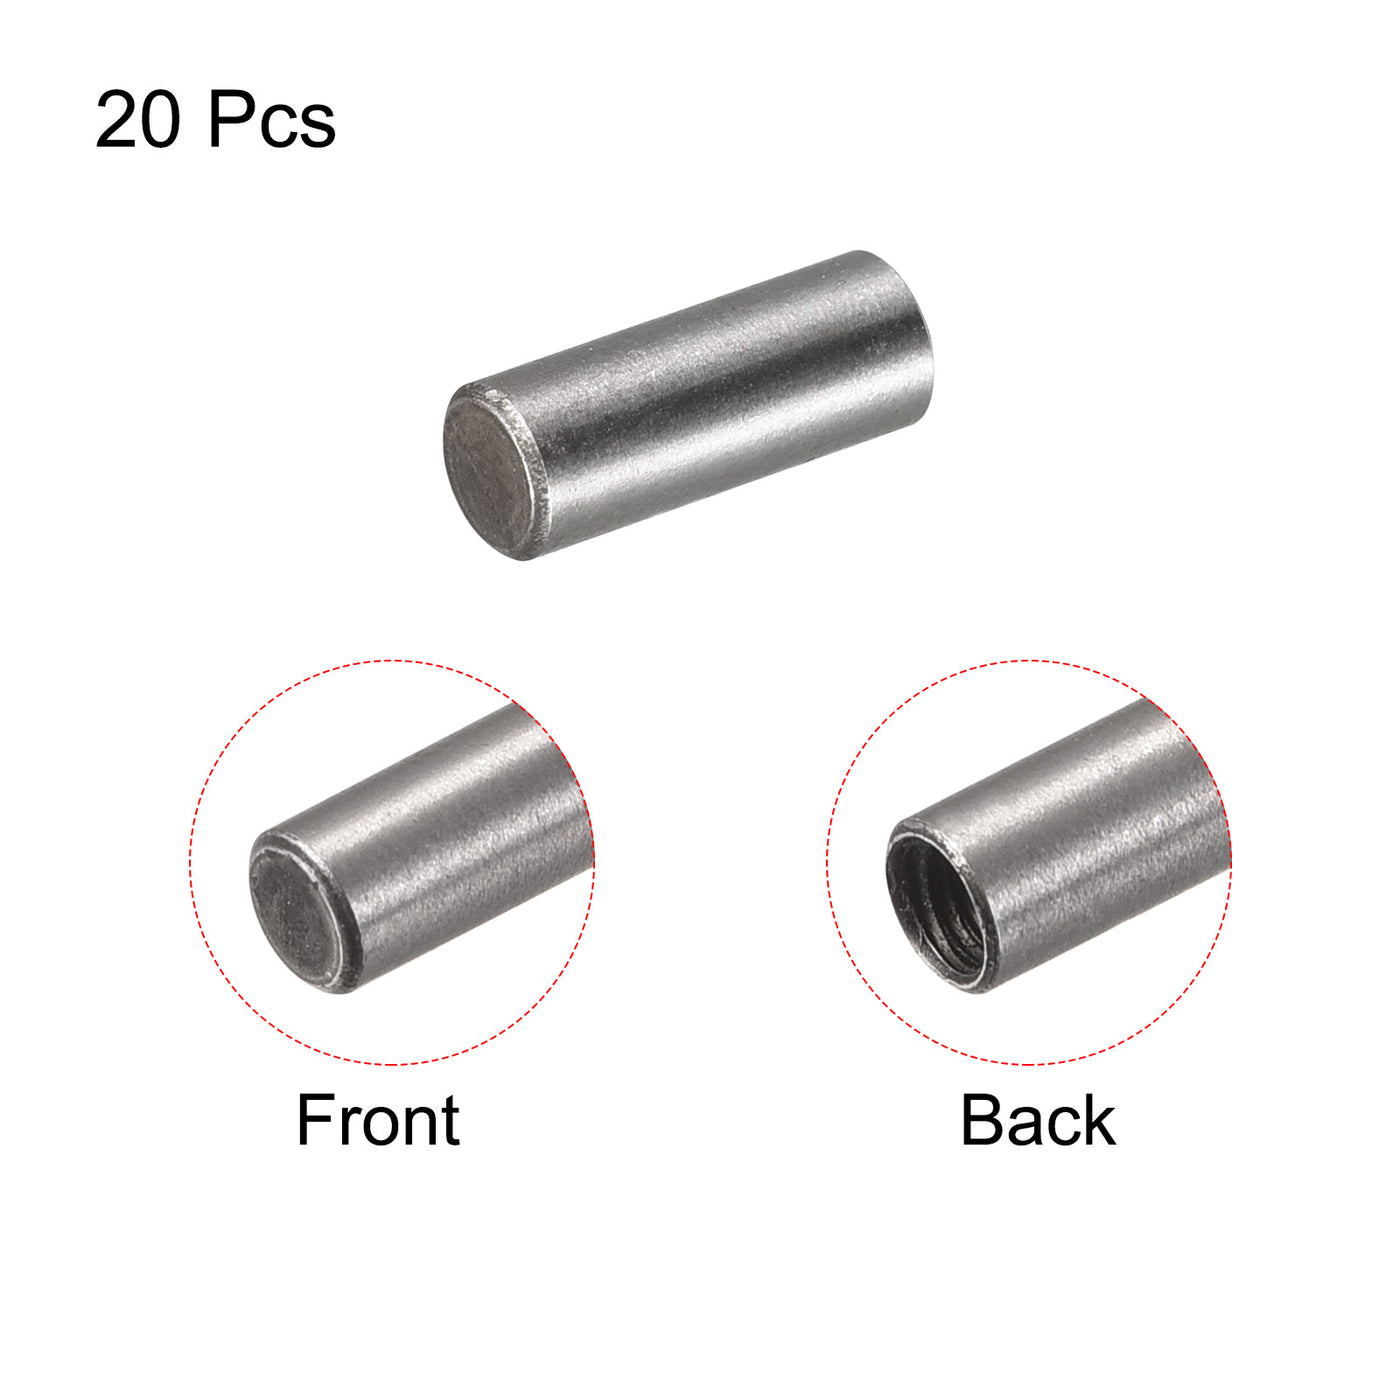 uxcell Uxcell Carbon Steel Dowel Pin 4 x 10mm M3 Female Thread Cylindrical Shelf Support Pin 20Pcs